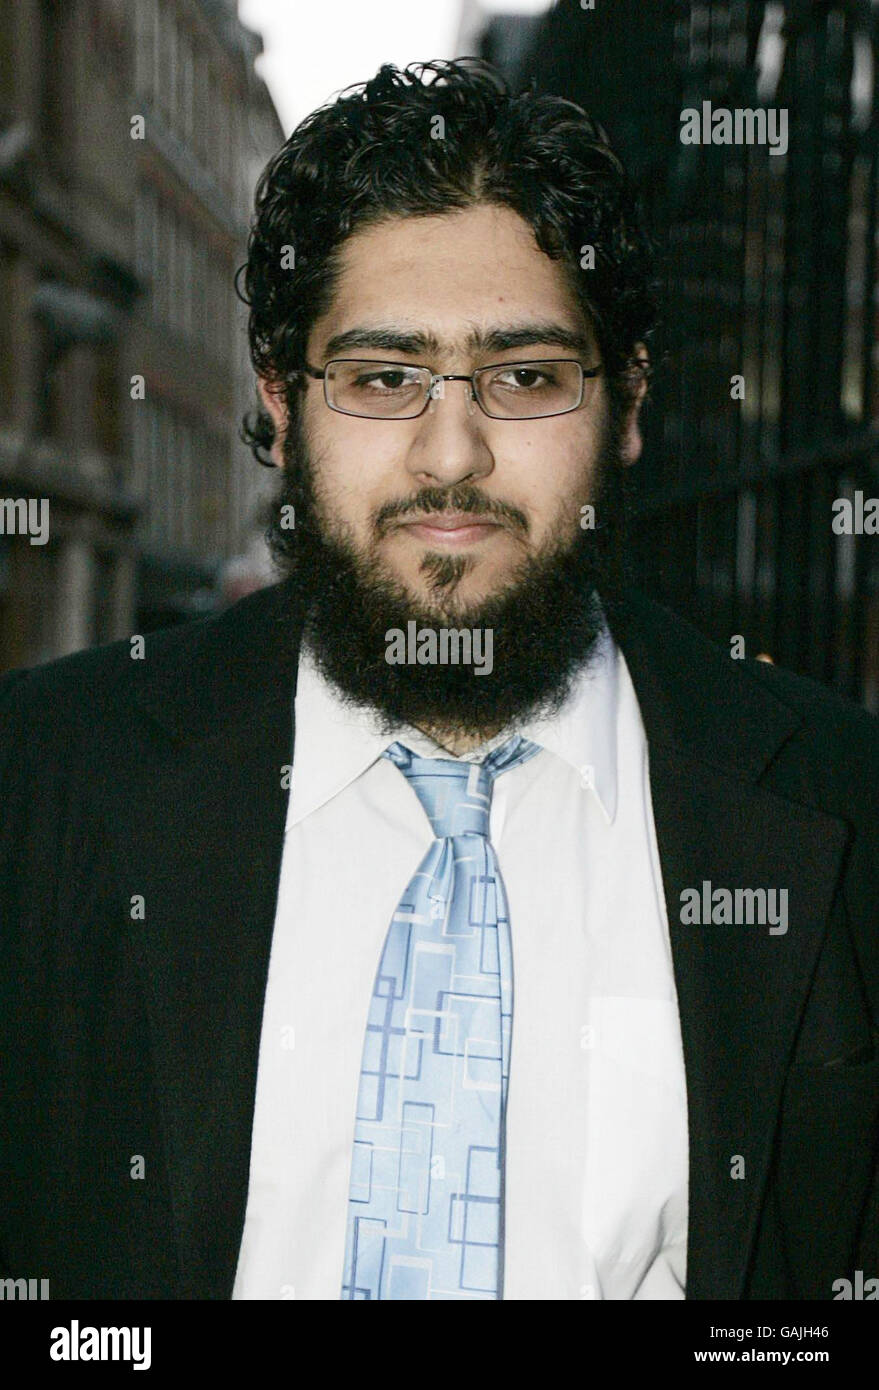 Awaad Iqbal, 20, leaves the High Court, London after being cleared of charges relating to terrorism. Stock Photo